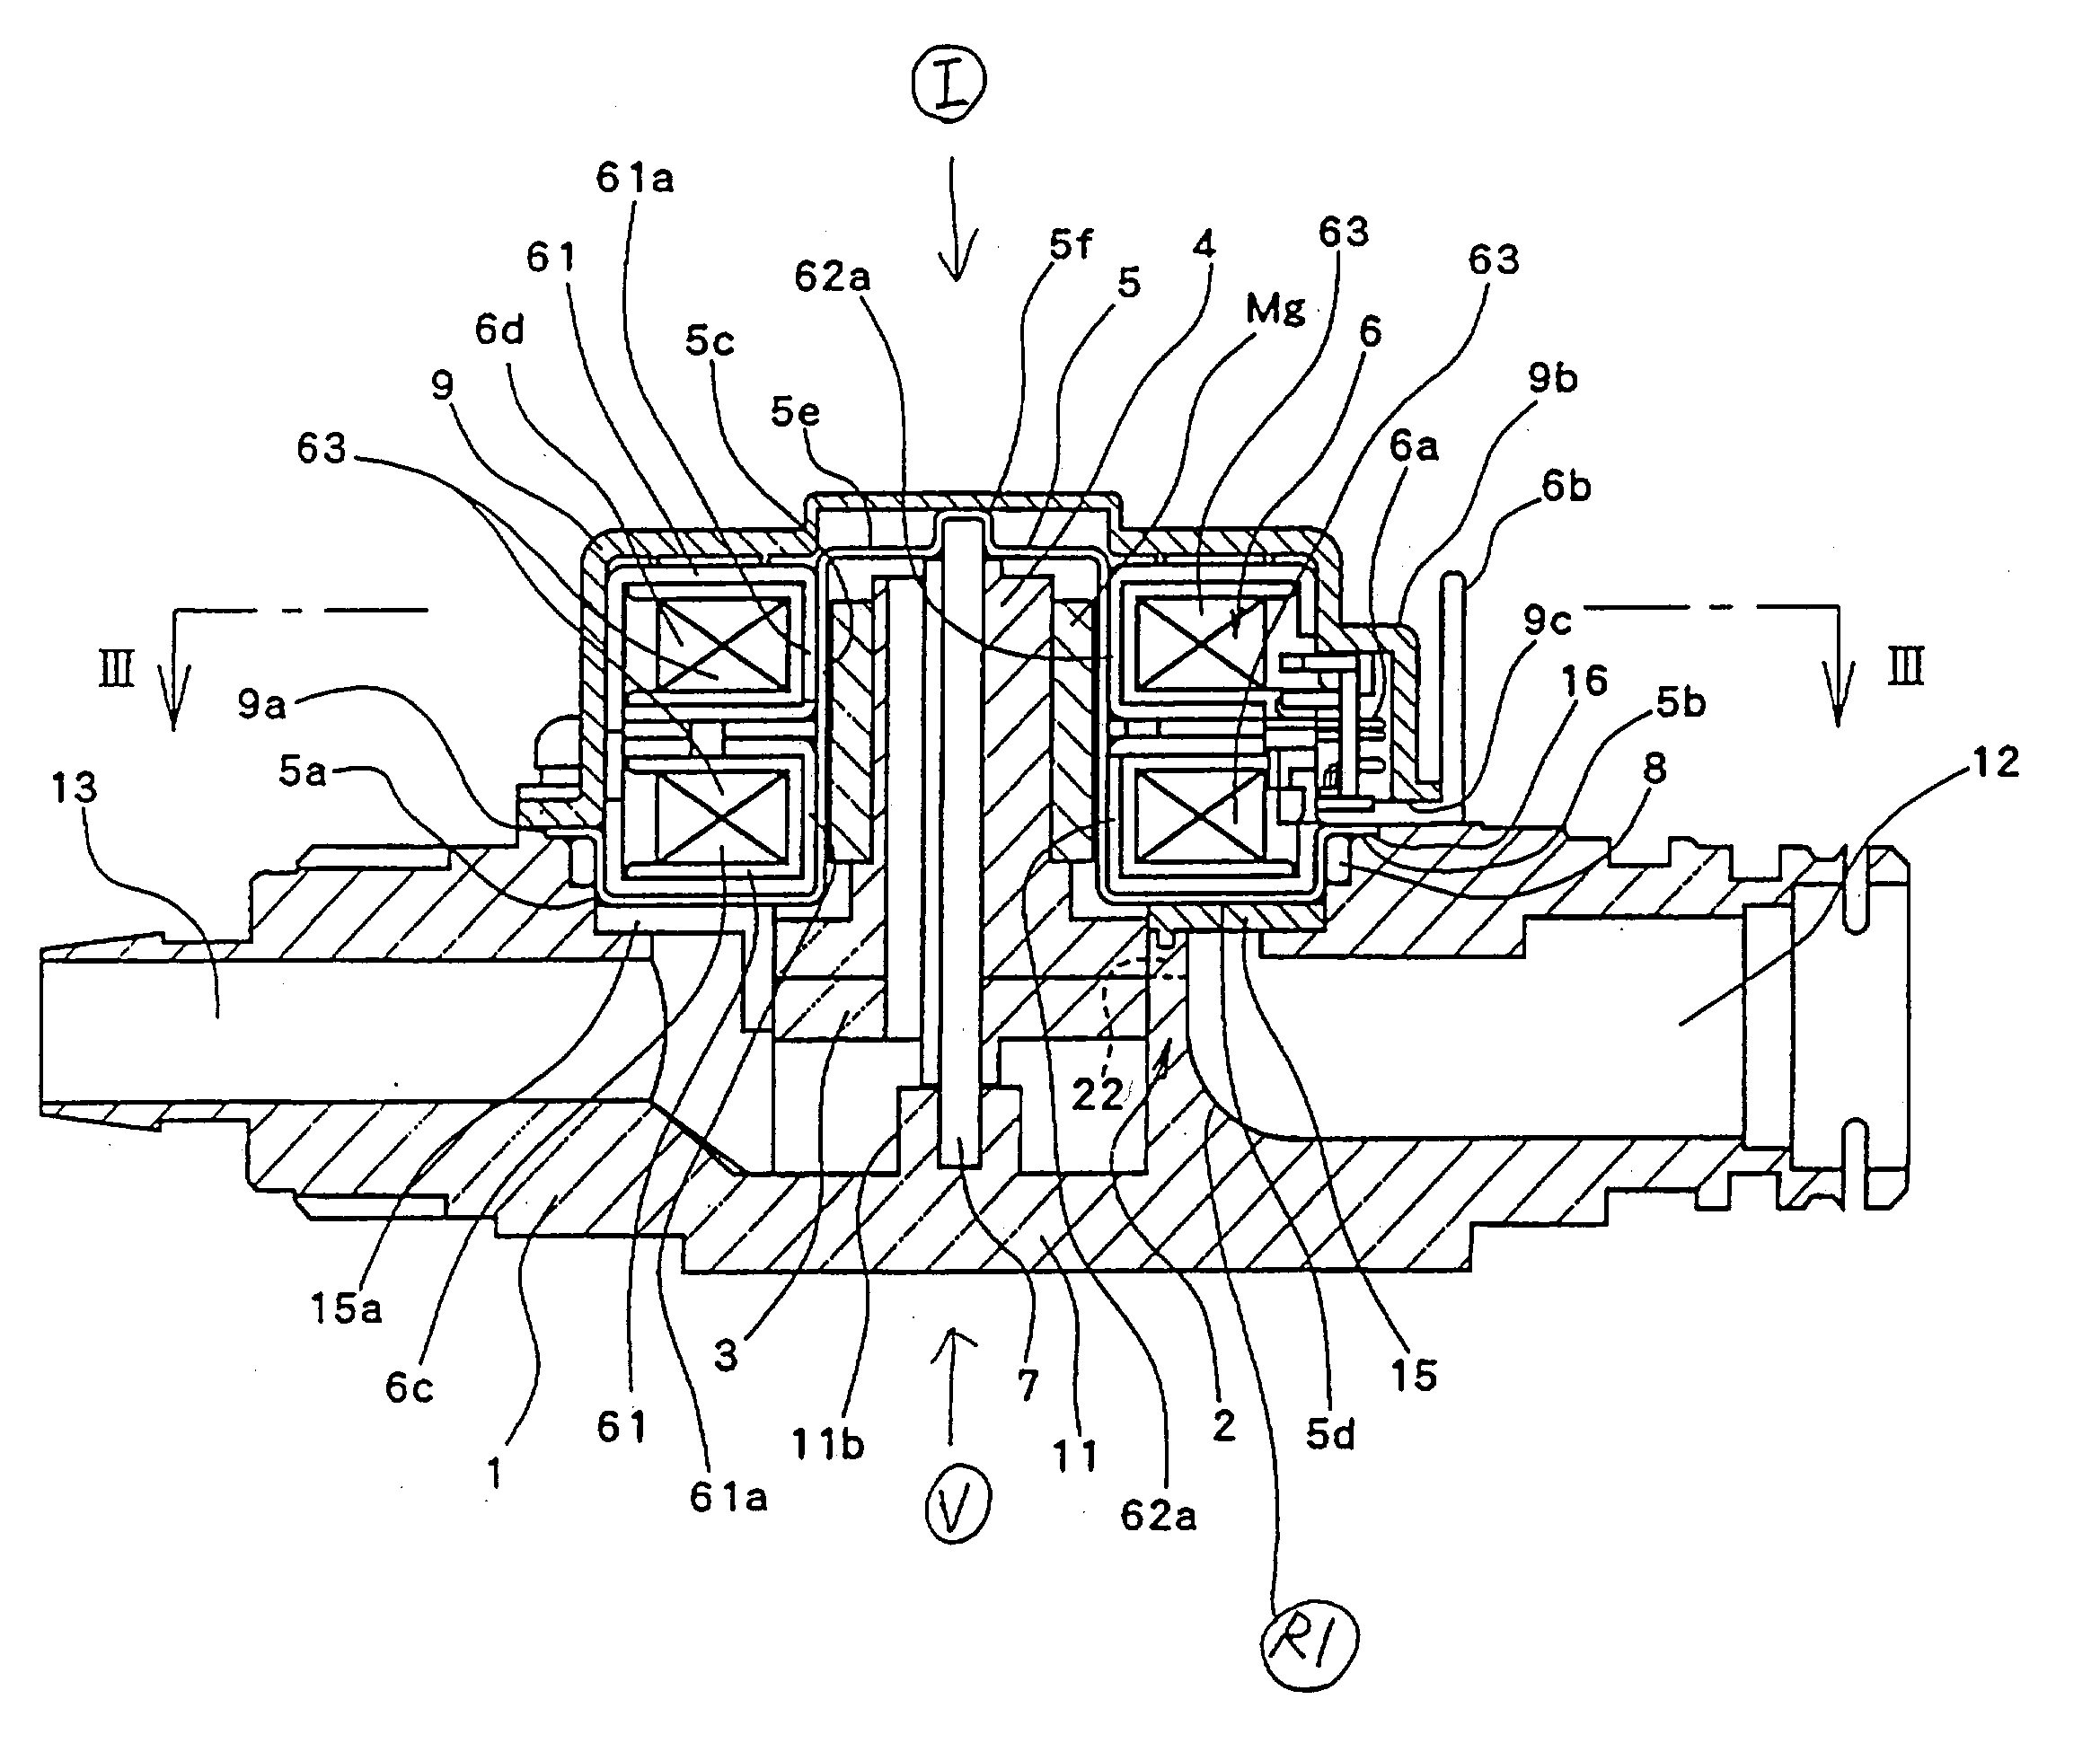 Small-sized hydroelectric power generating apparatus